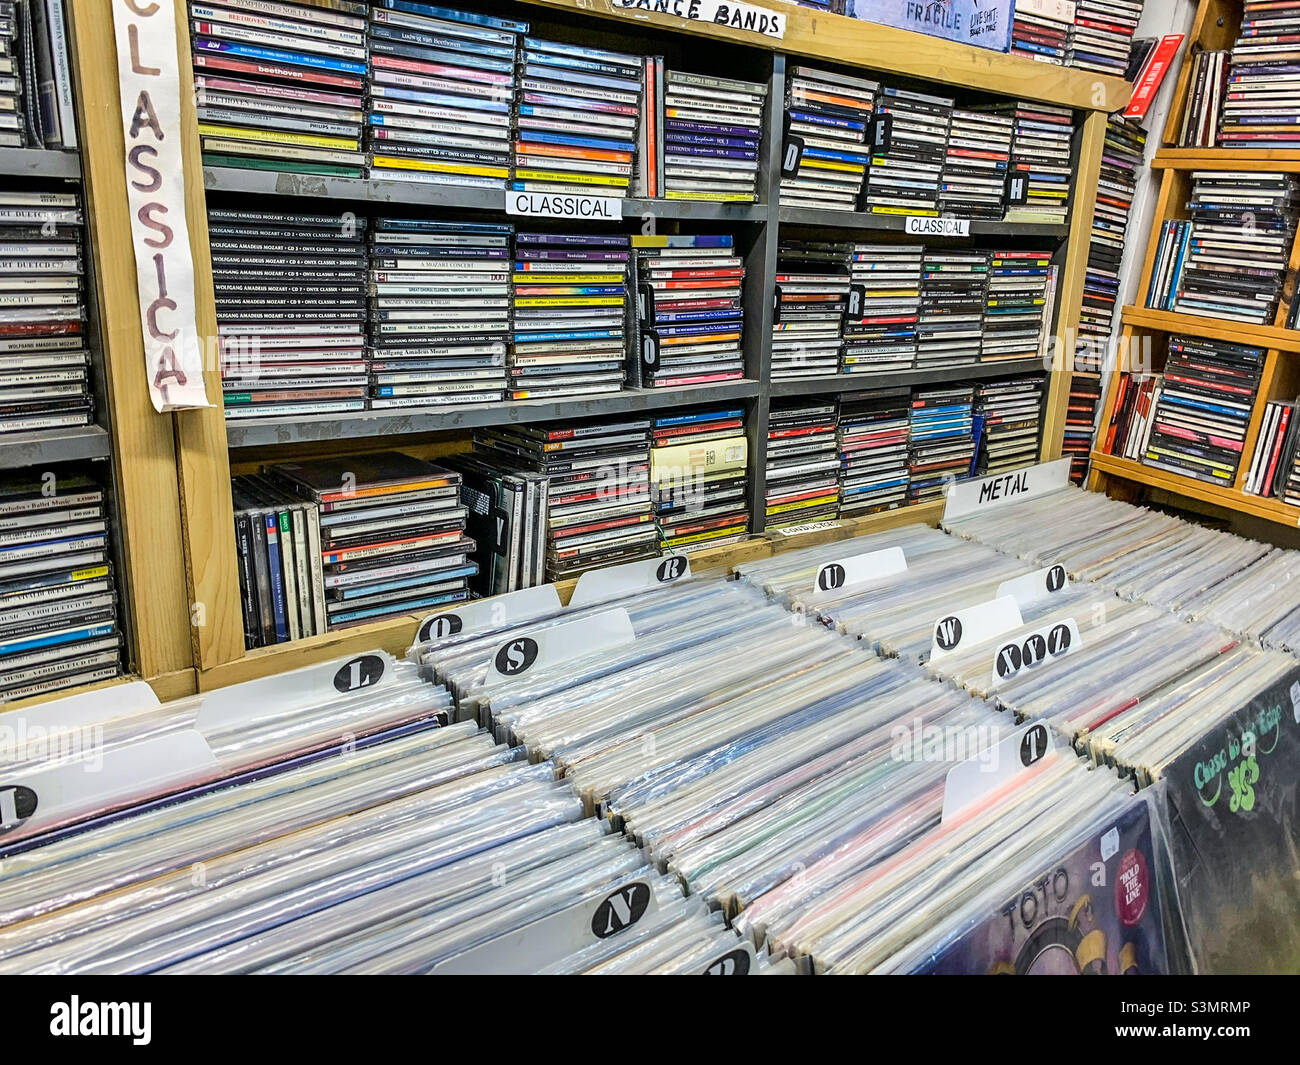 Inside Sounds ok record shop in Falmouth Cornwall Stock Photo